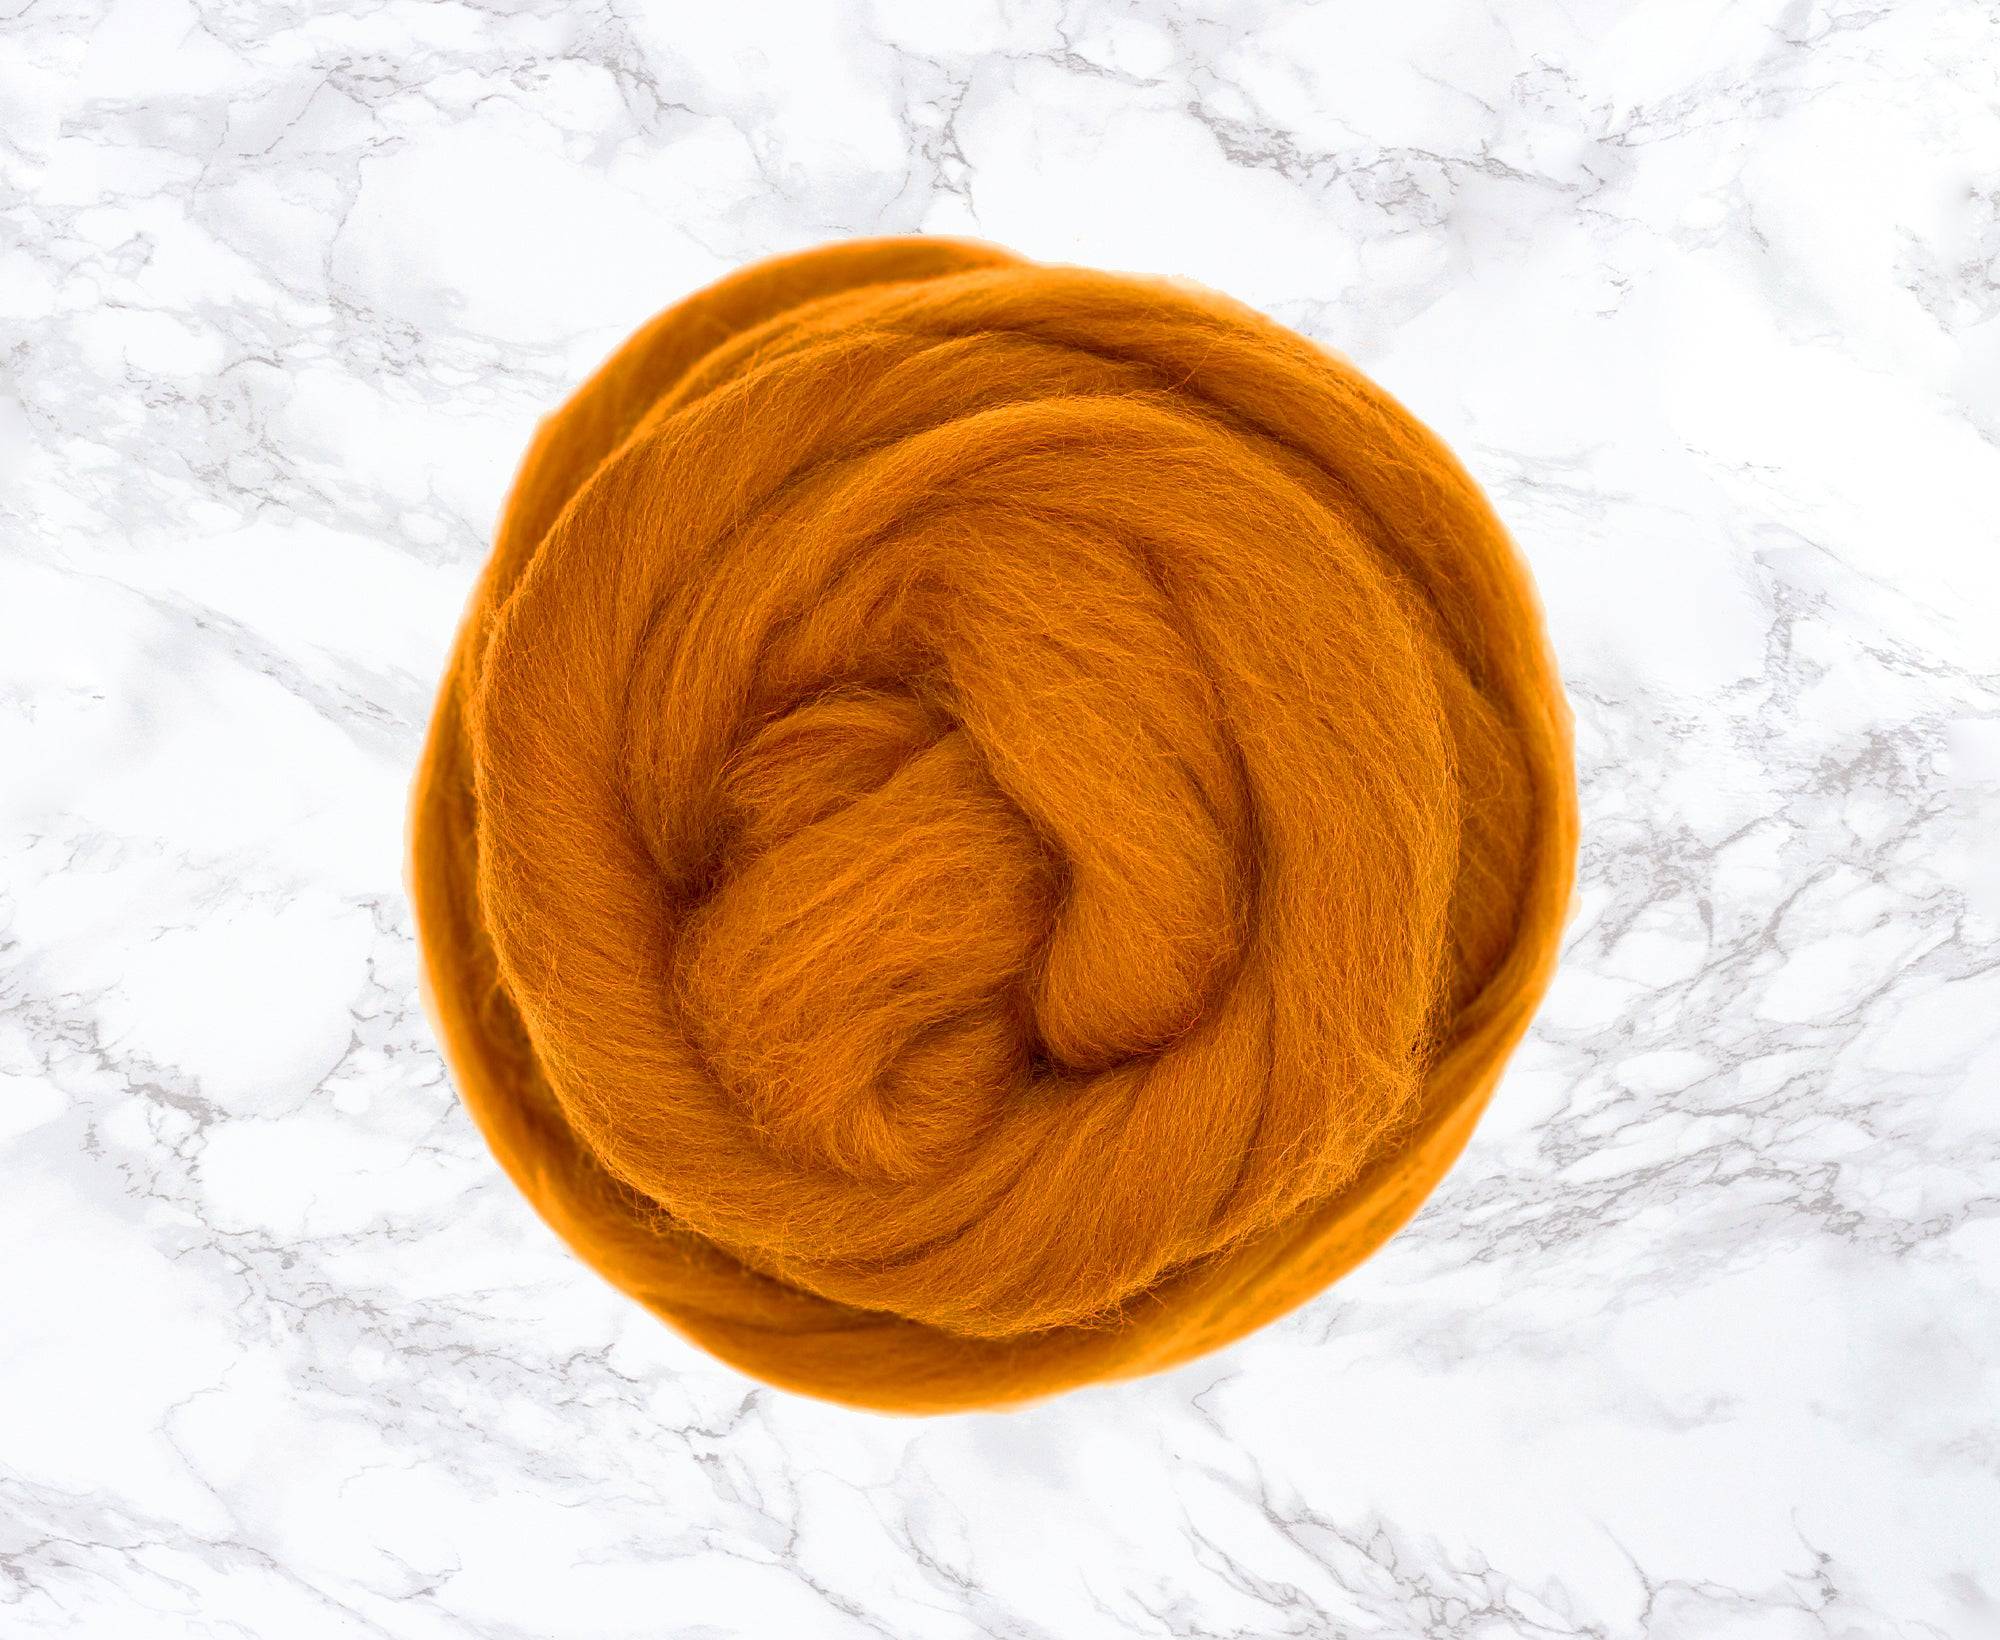 Dyed Wool for Felting, Spinning and Crafting